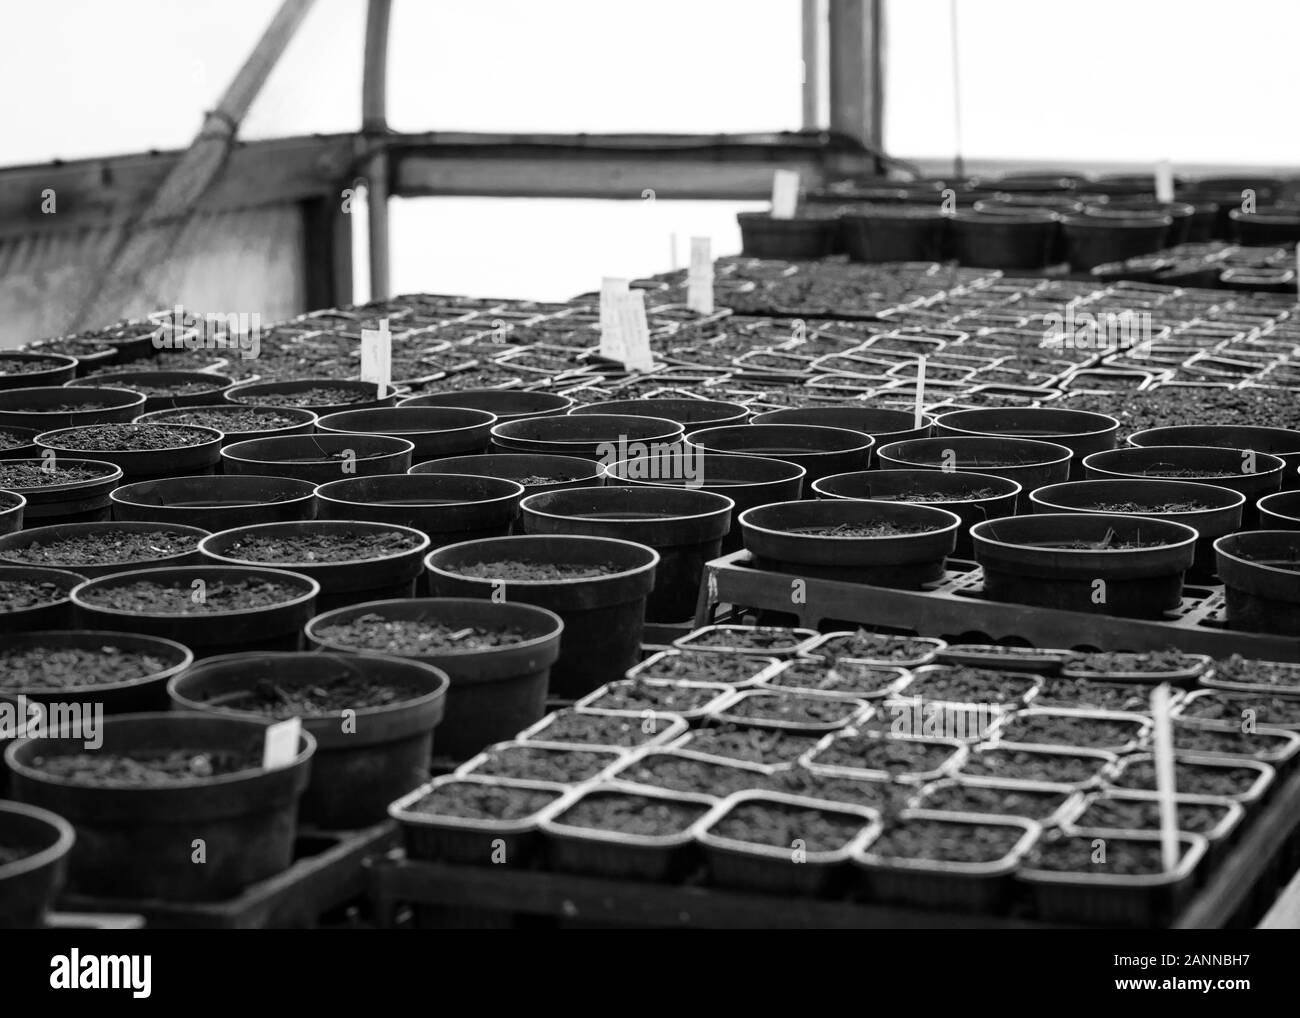 Selection of gardening pots lined up awaiting the gardener to plant seeds and distribute them ready for spring, Devon UK Stock Photo